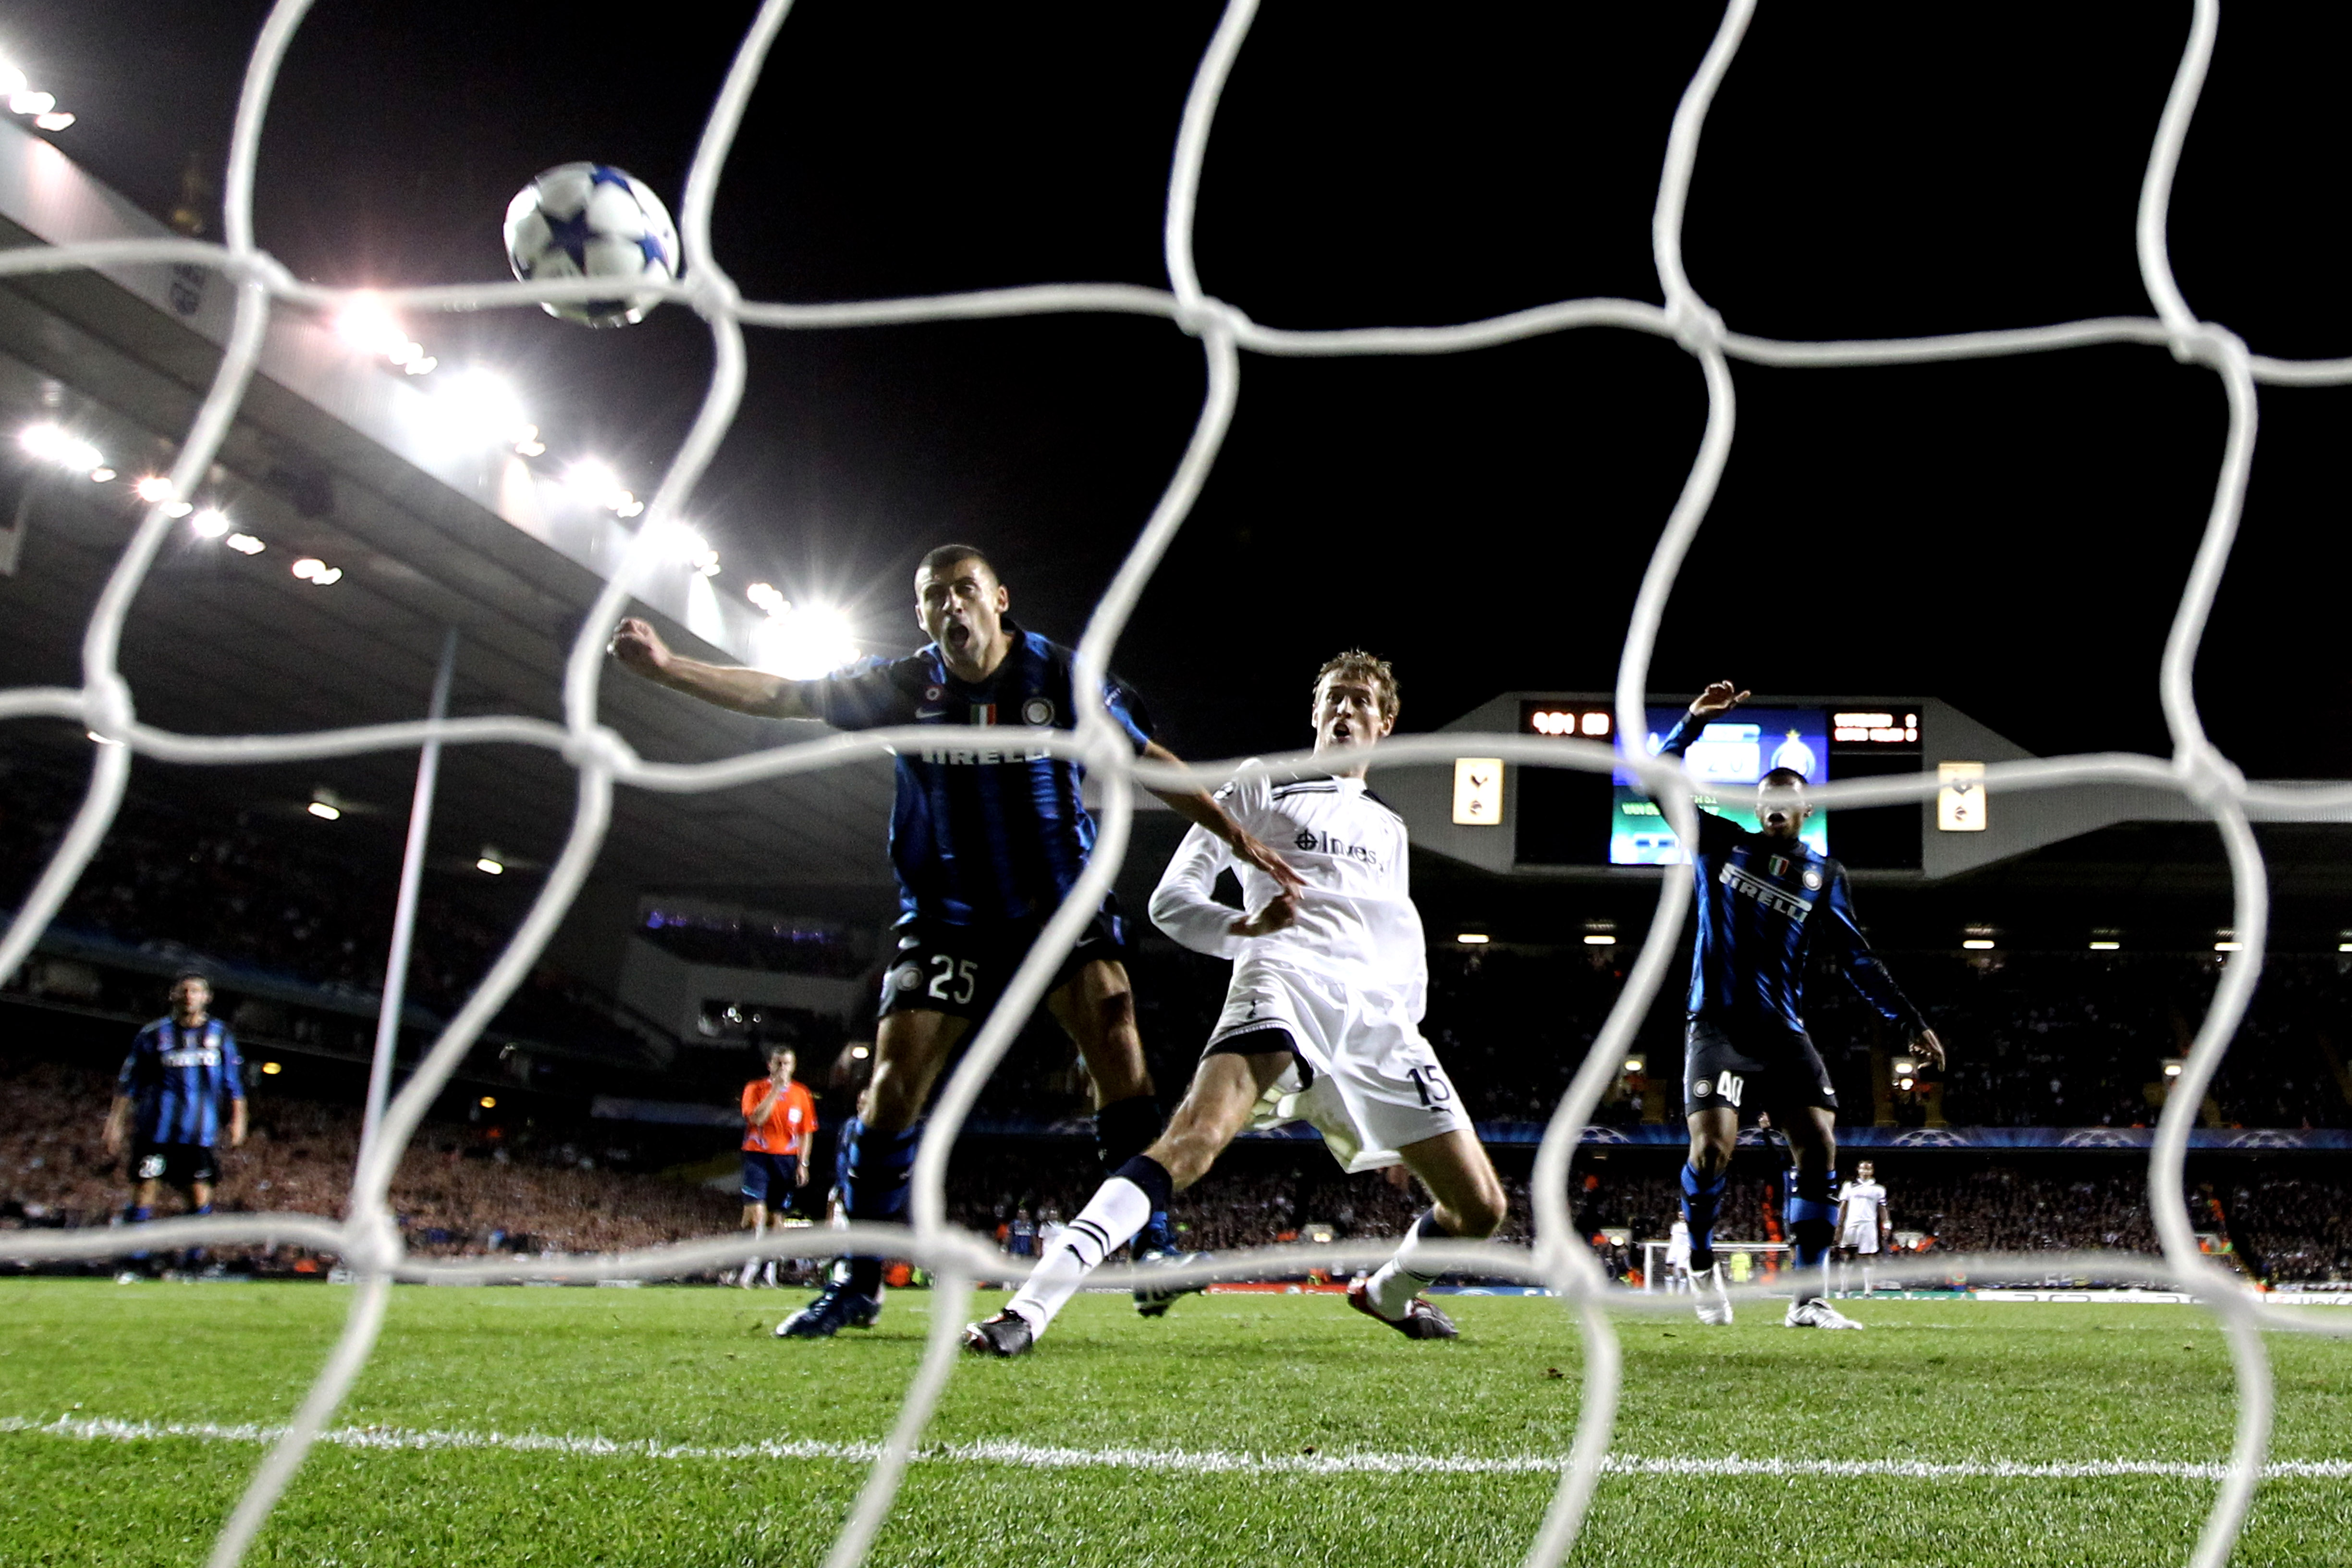 LONDON, ENGLAND - NOVEMBER 02:  Peter Crouch of Spurs gets infront of Walter Samuel of Inter Milan to prod the ball into the net, but the goal is disaallowed during the UEFA Champions League Group A match between Tottenham Hotspur and Inter Milan at White